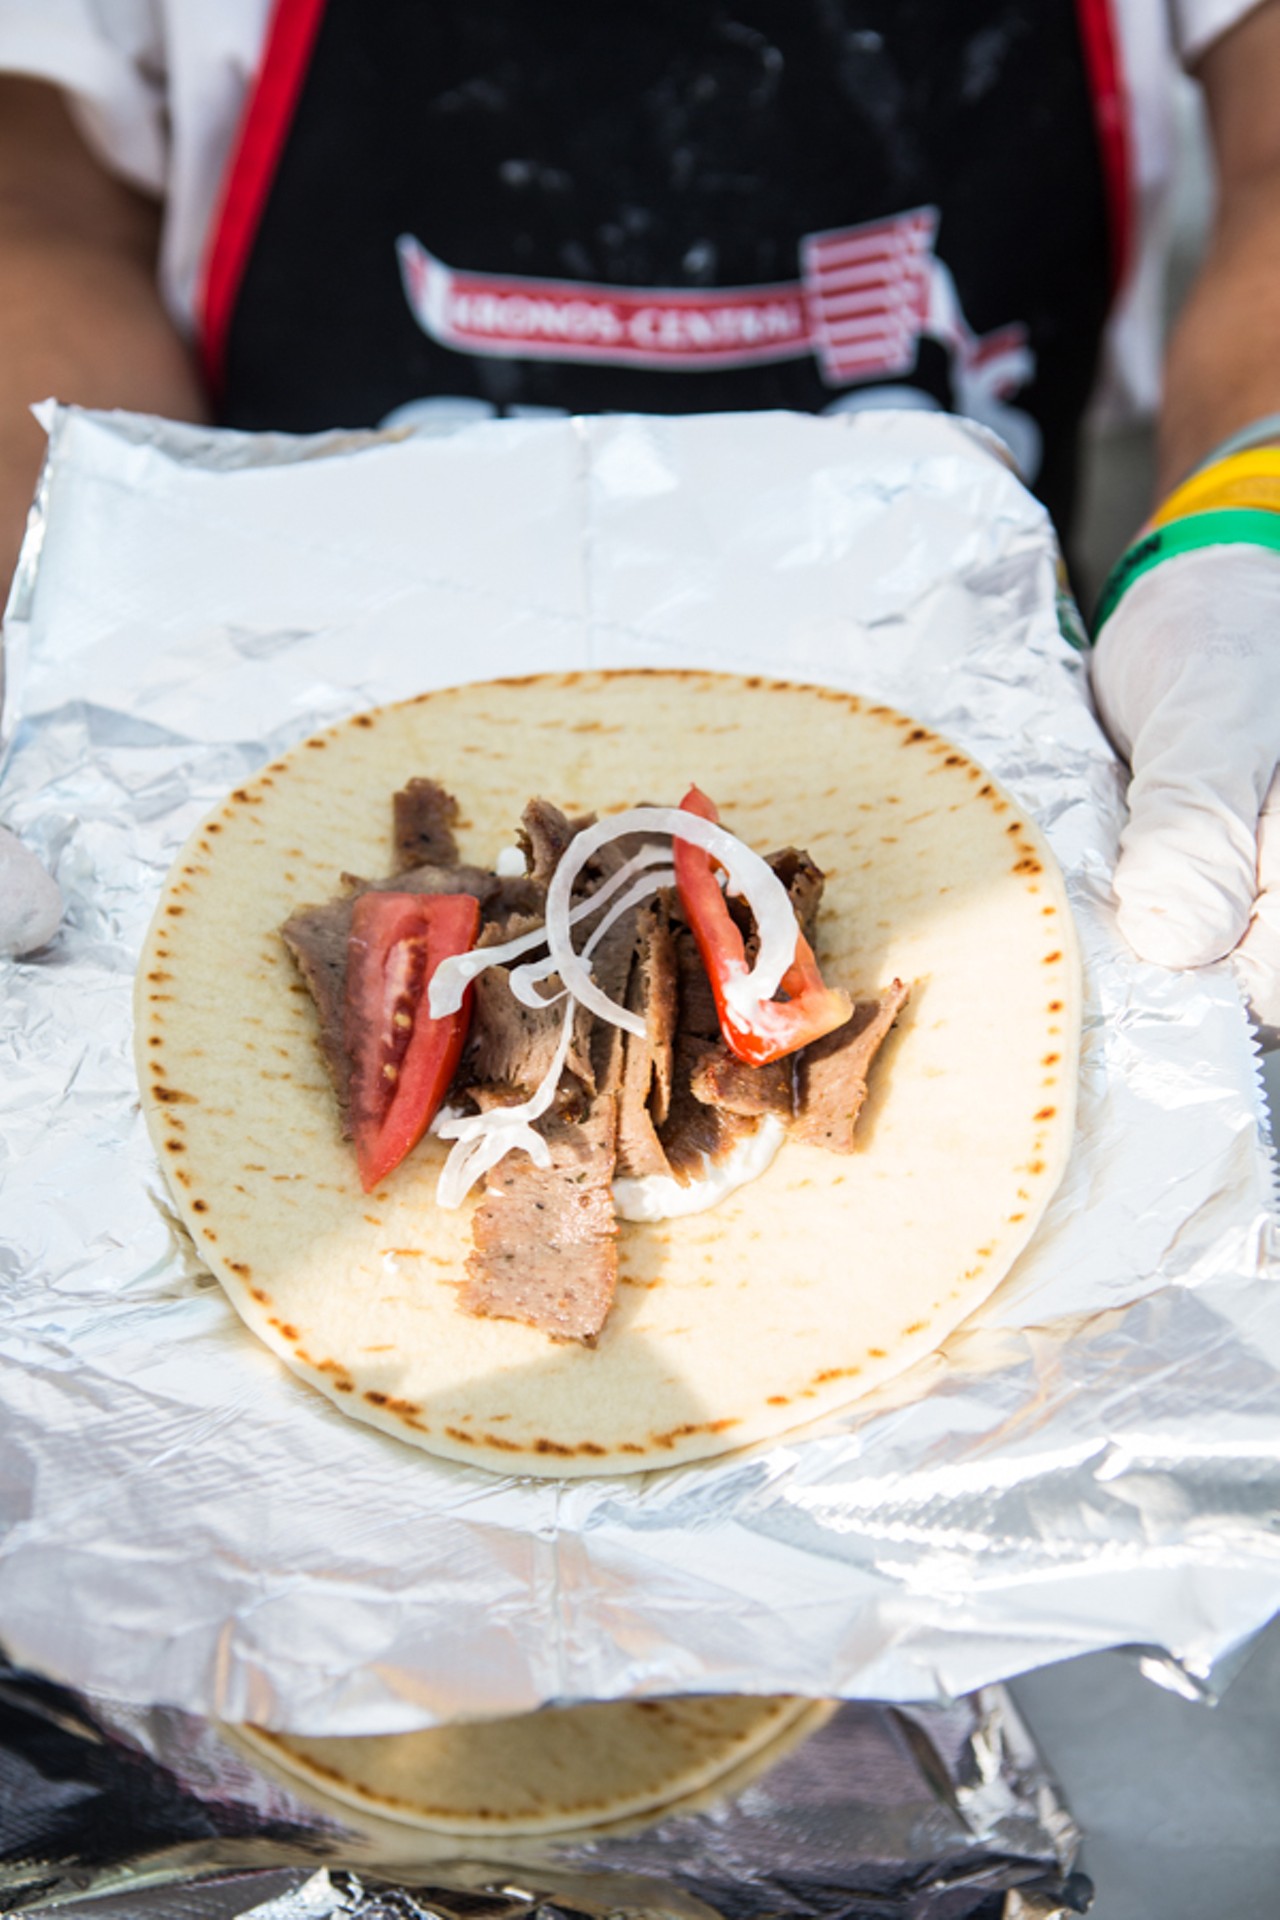 An unwrapped gyro from the Greek tent.